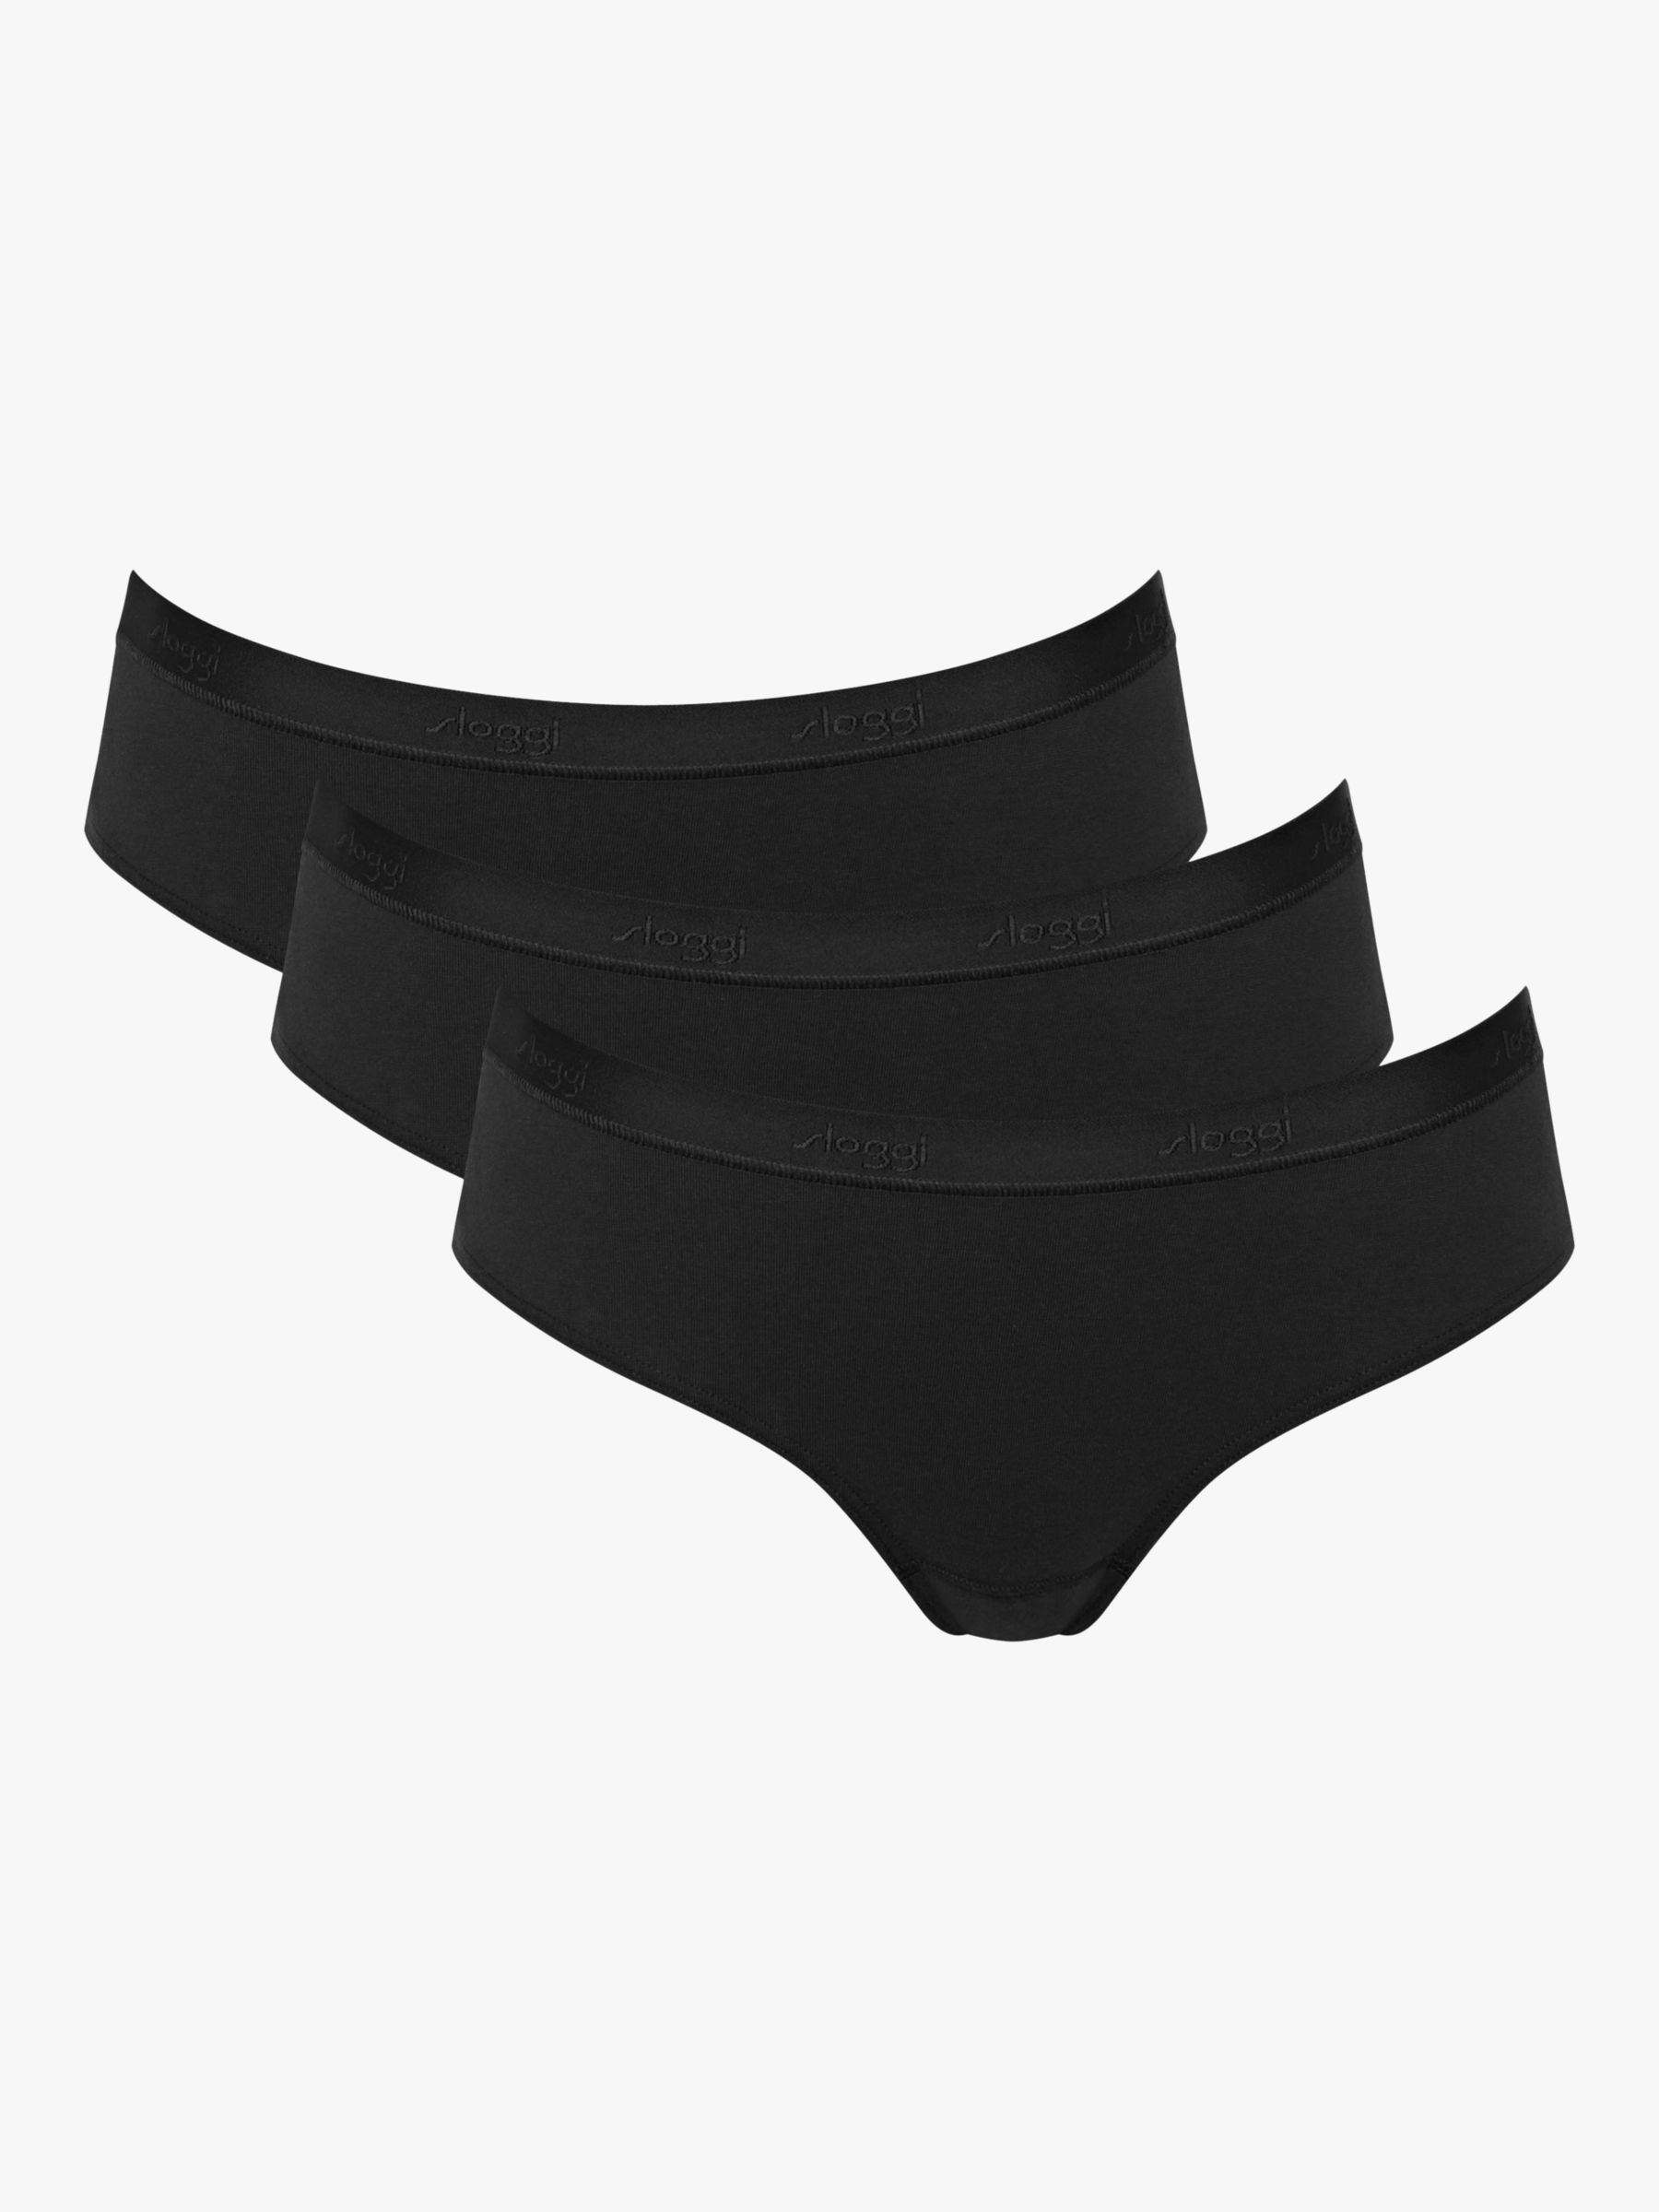 Buy sloggi GO Casual Hipster Knickers, Pack of 3 Online at johnlewis.com